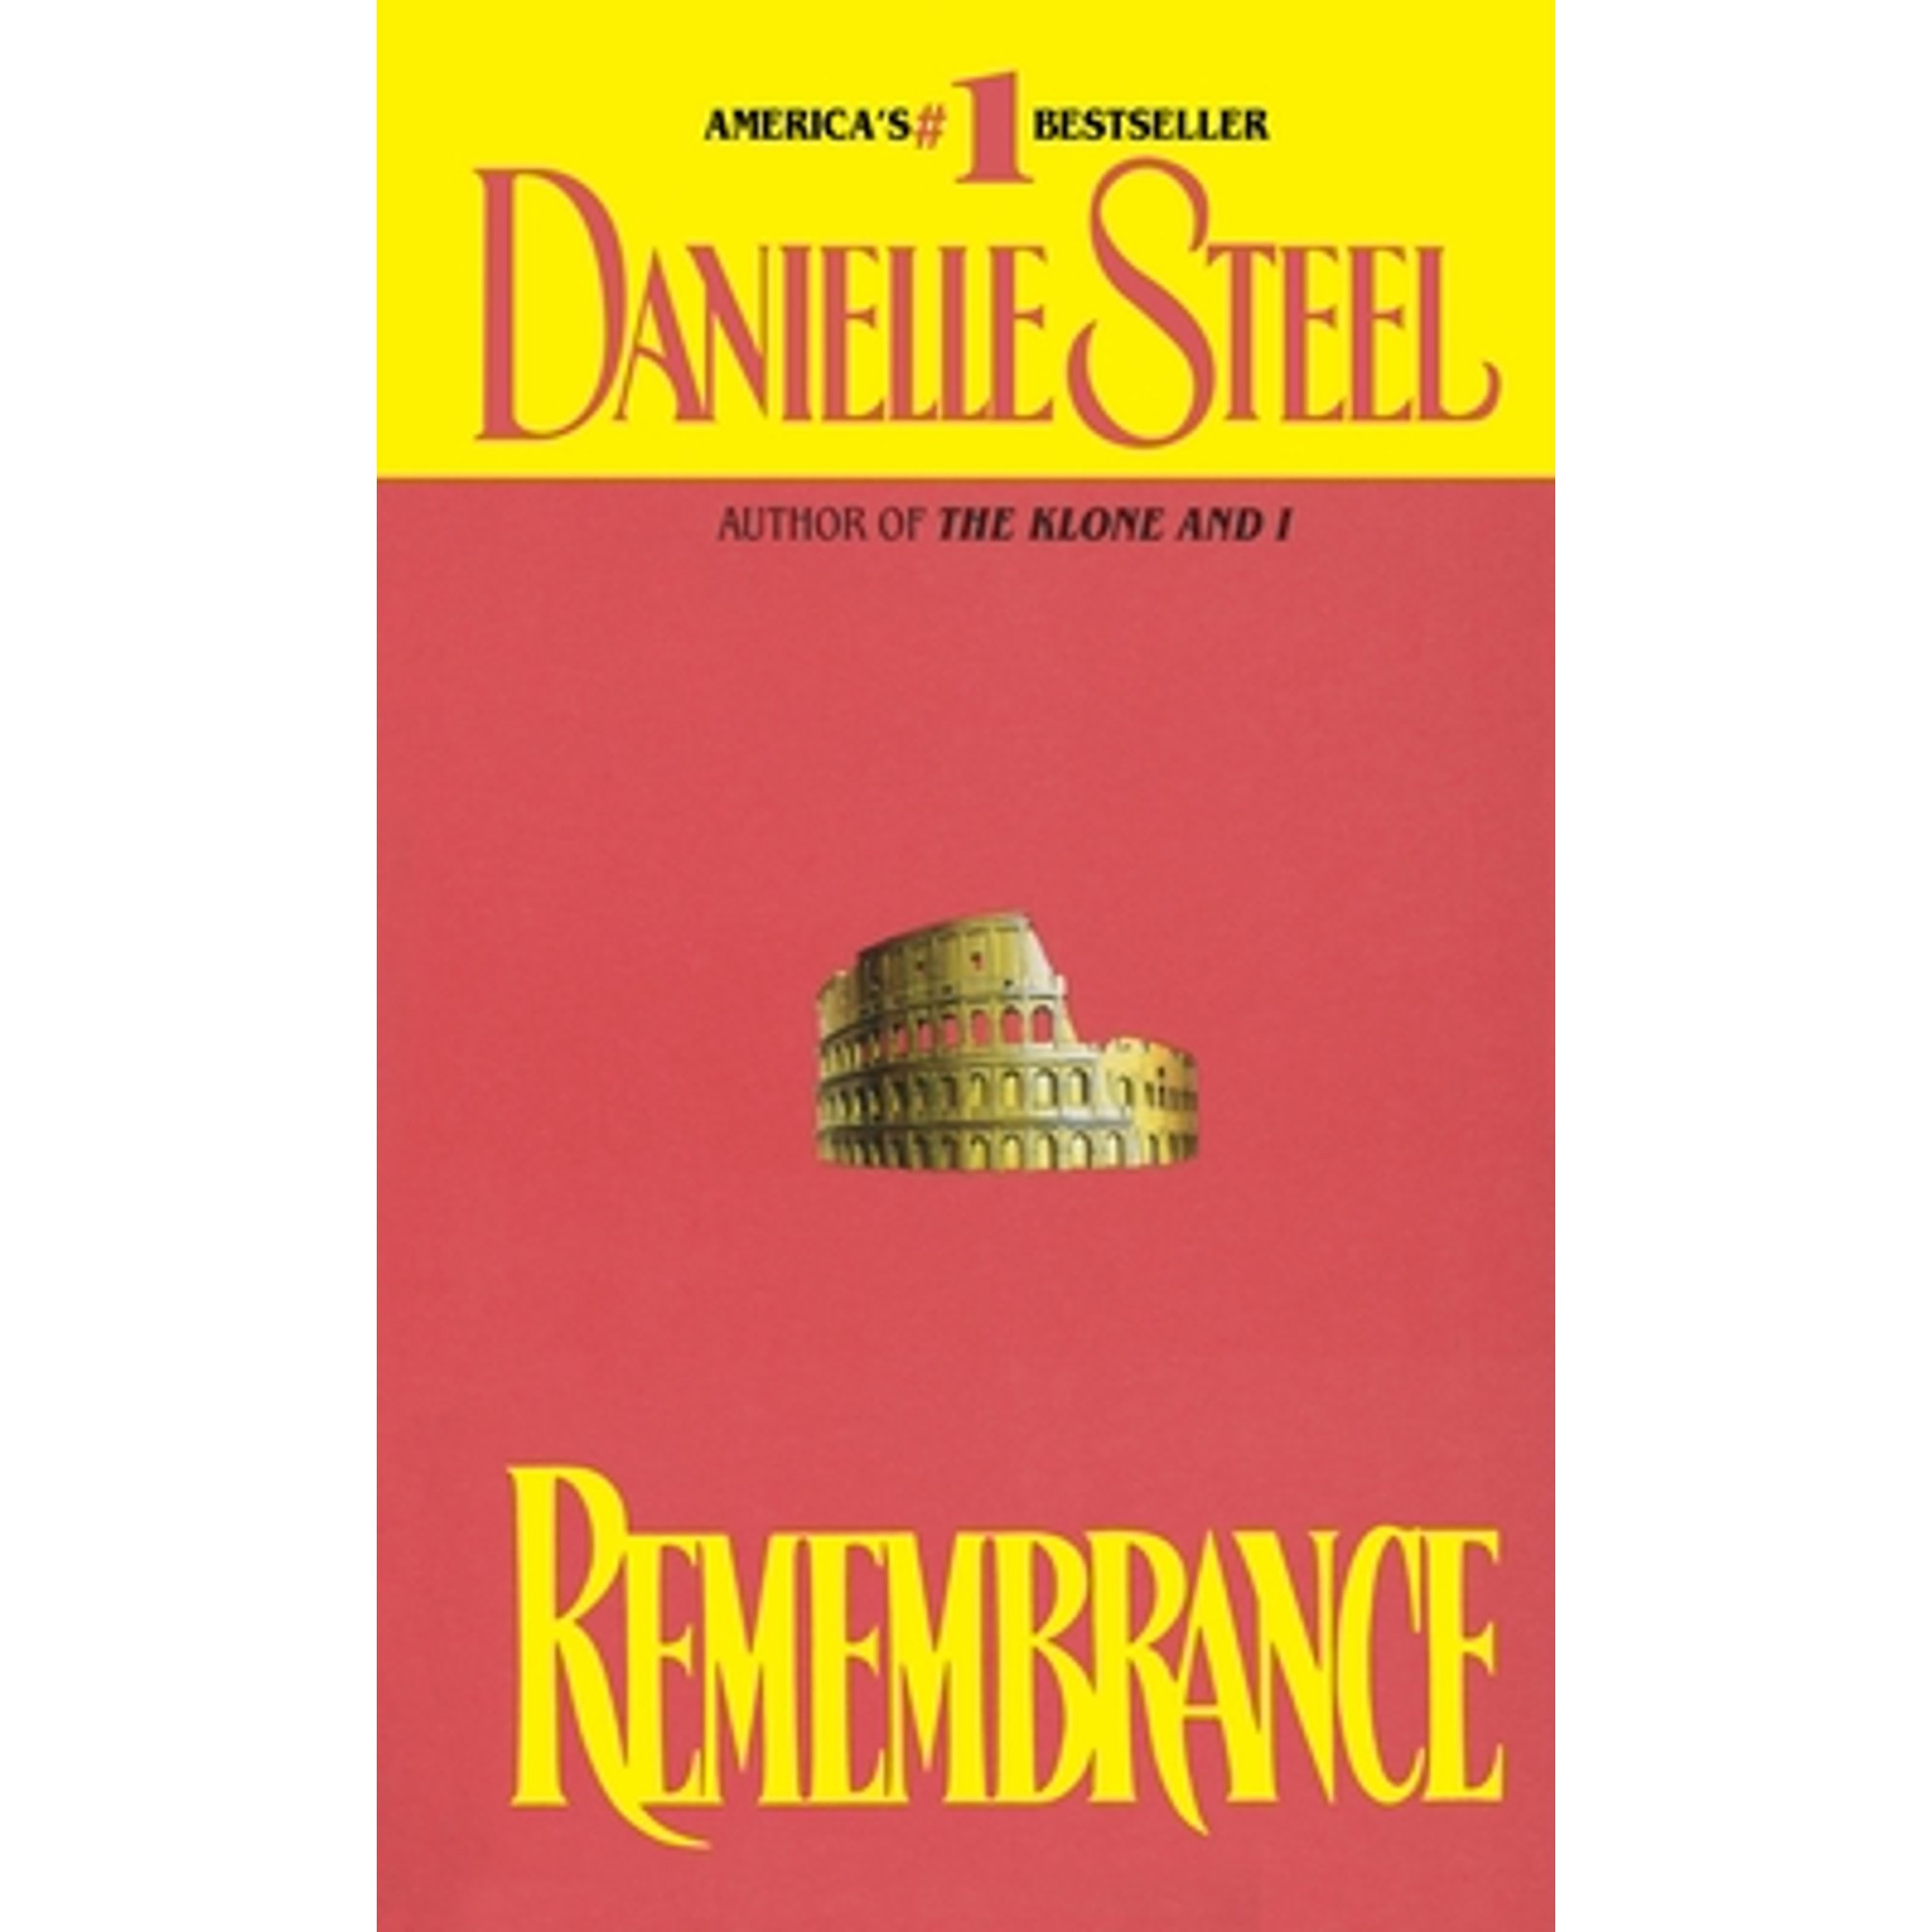 Remembrance (Paperback) - image 1 of 1